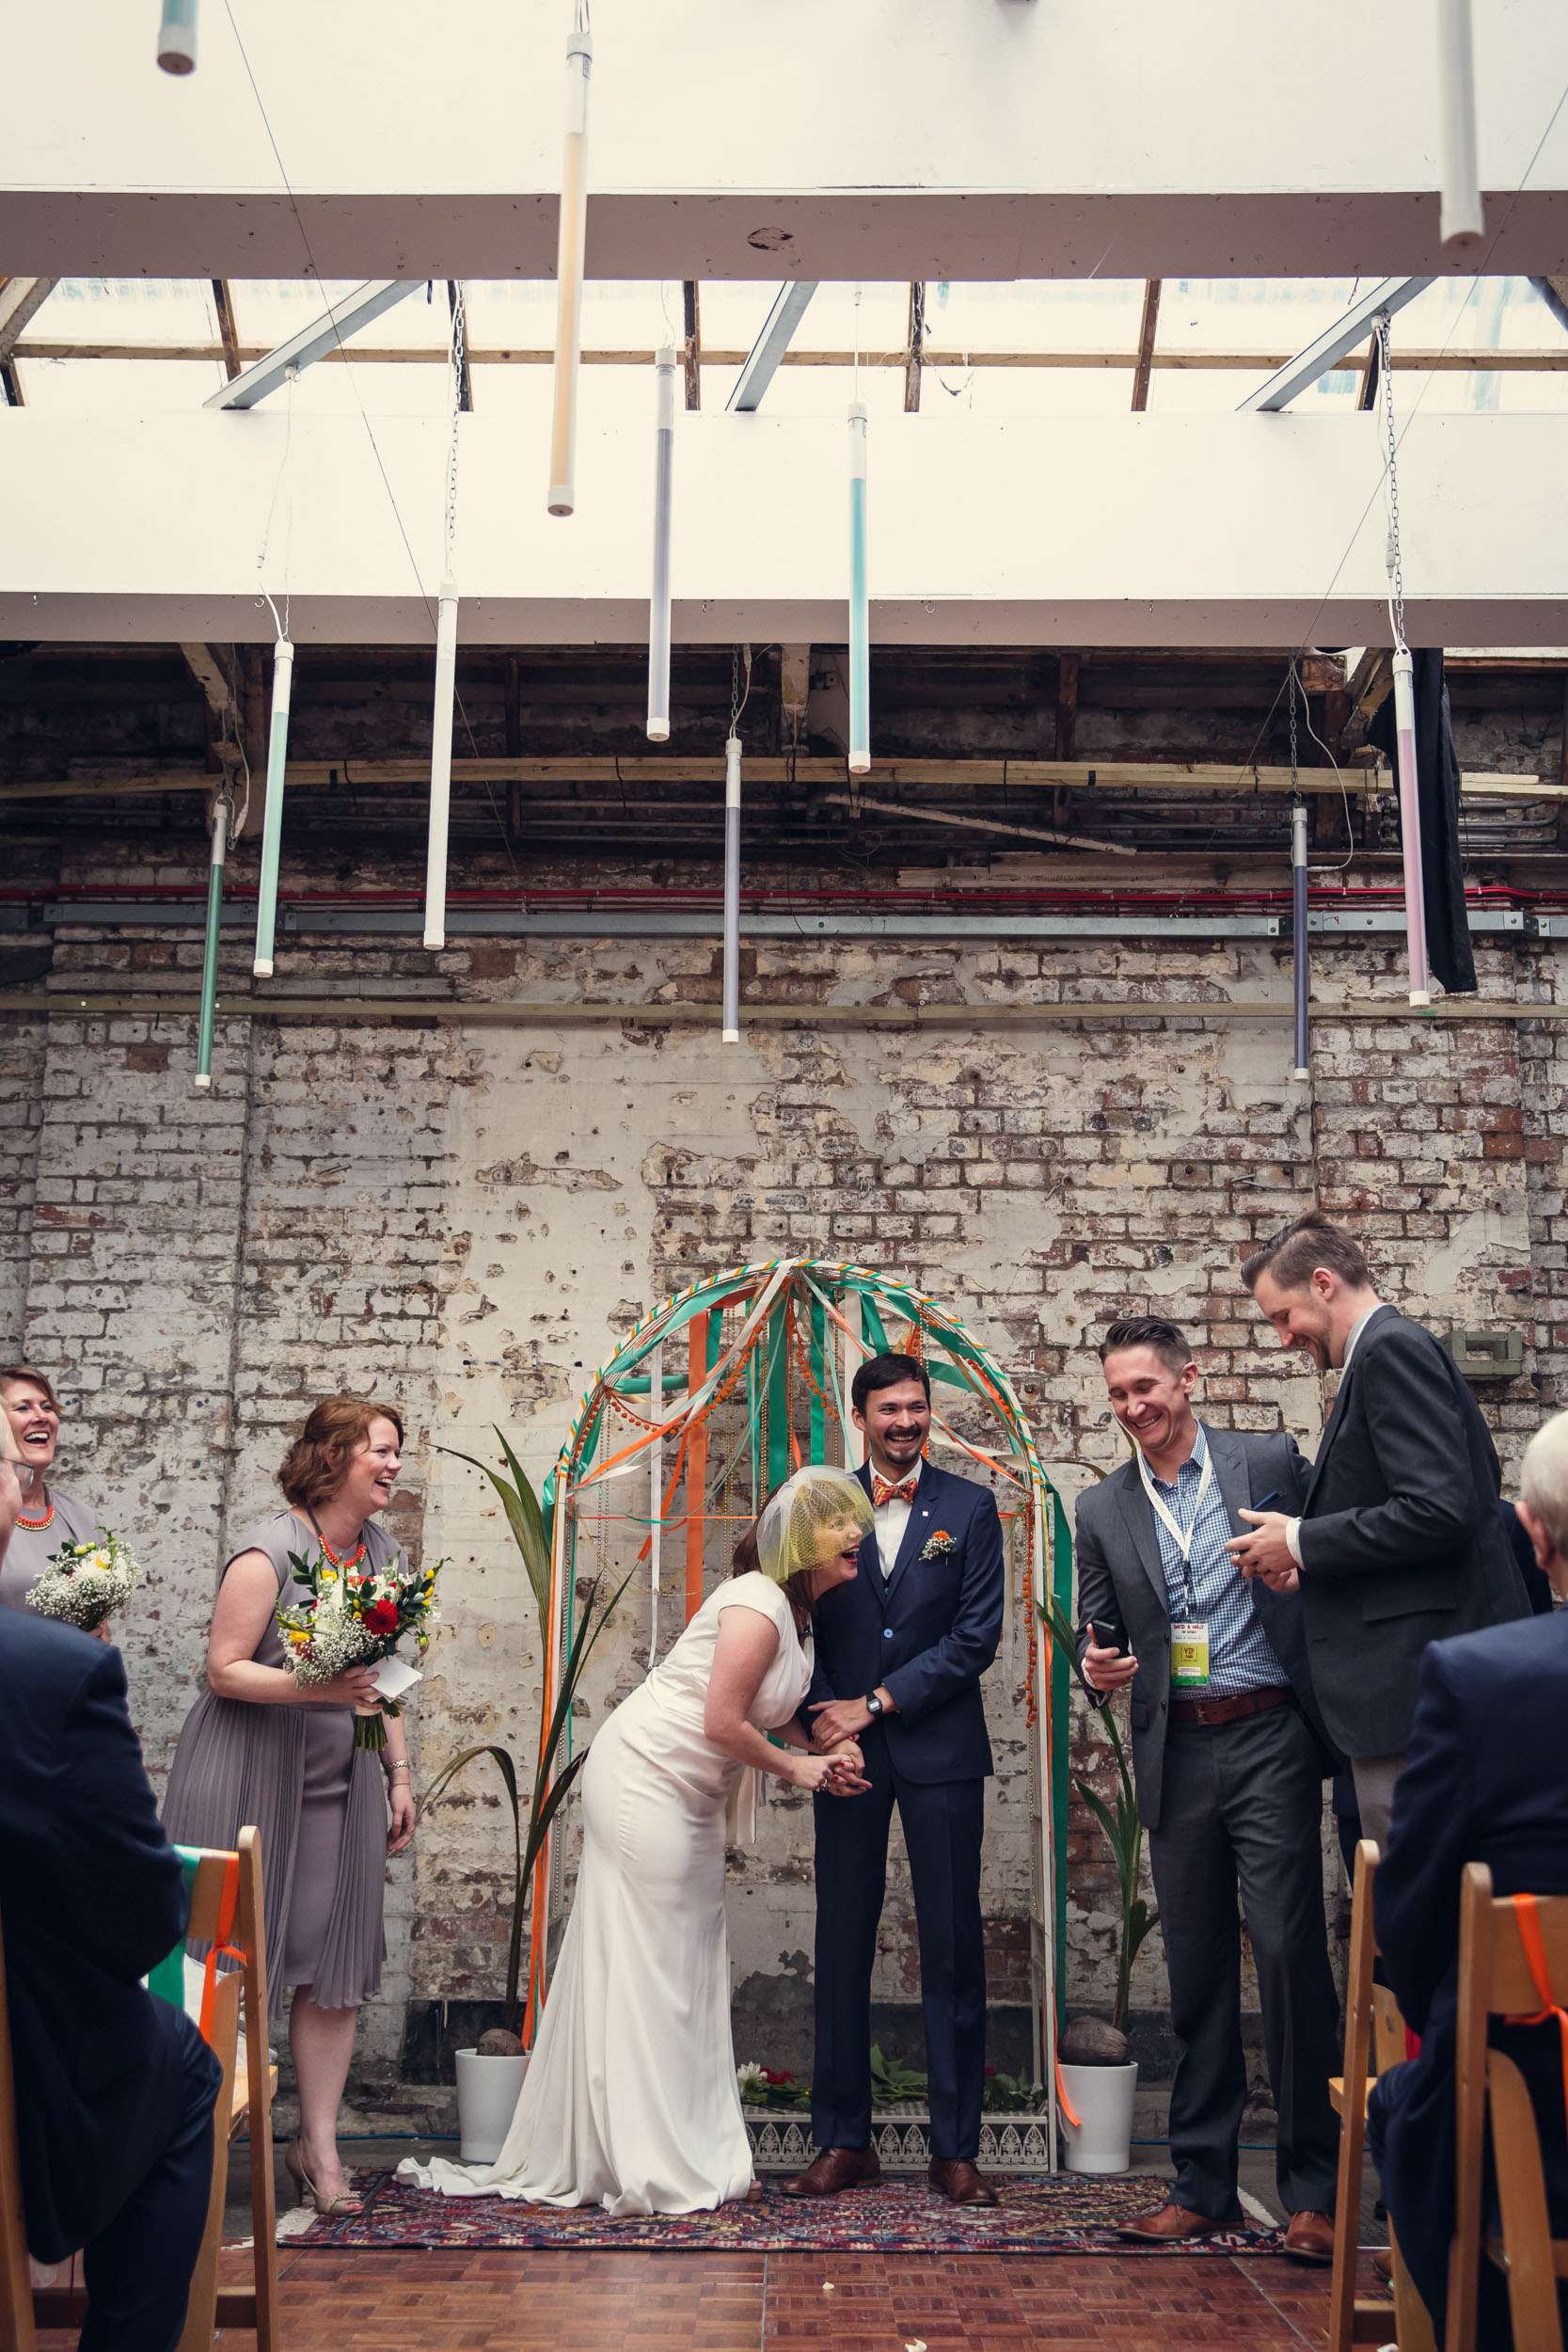 Indoor Festival Wedding at an Industrial Warehouse (15)